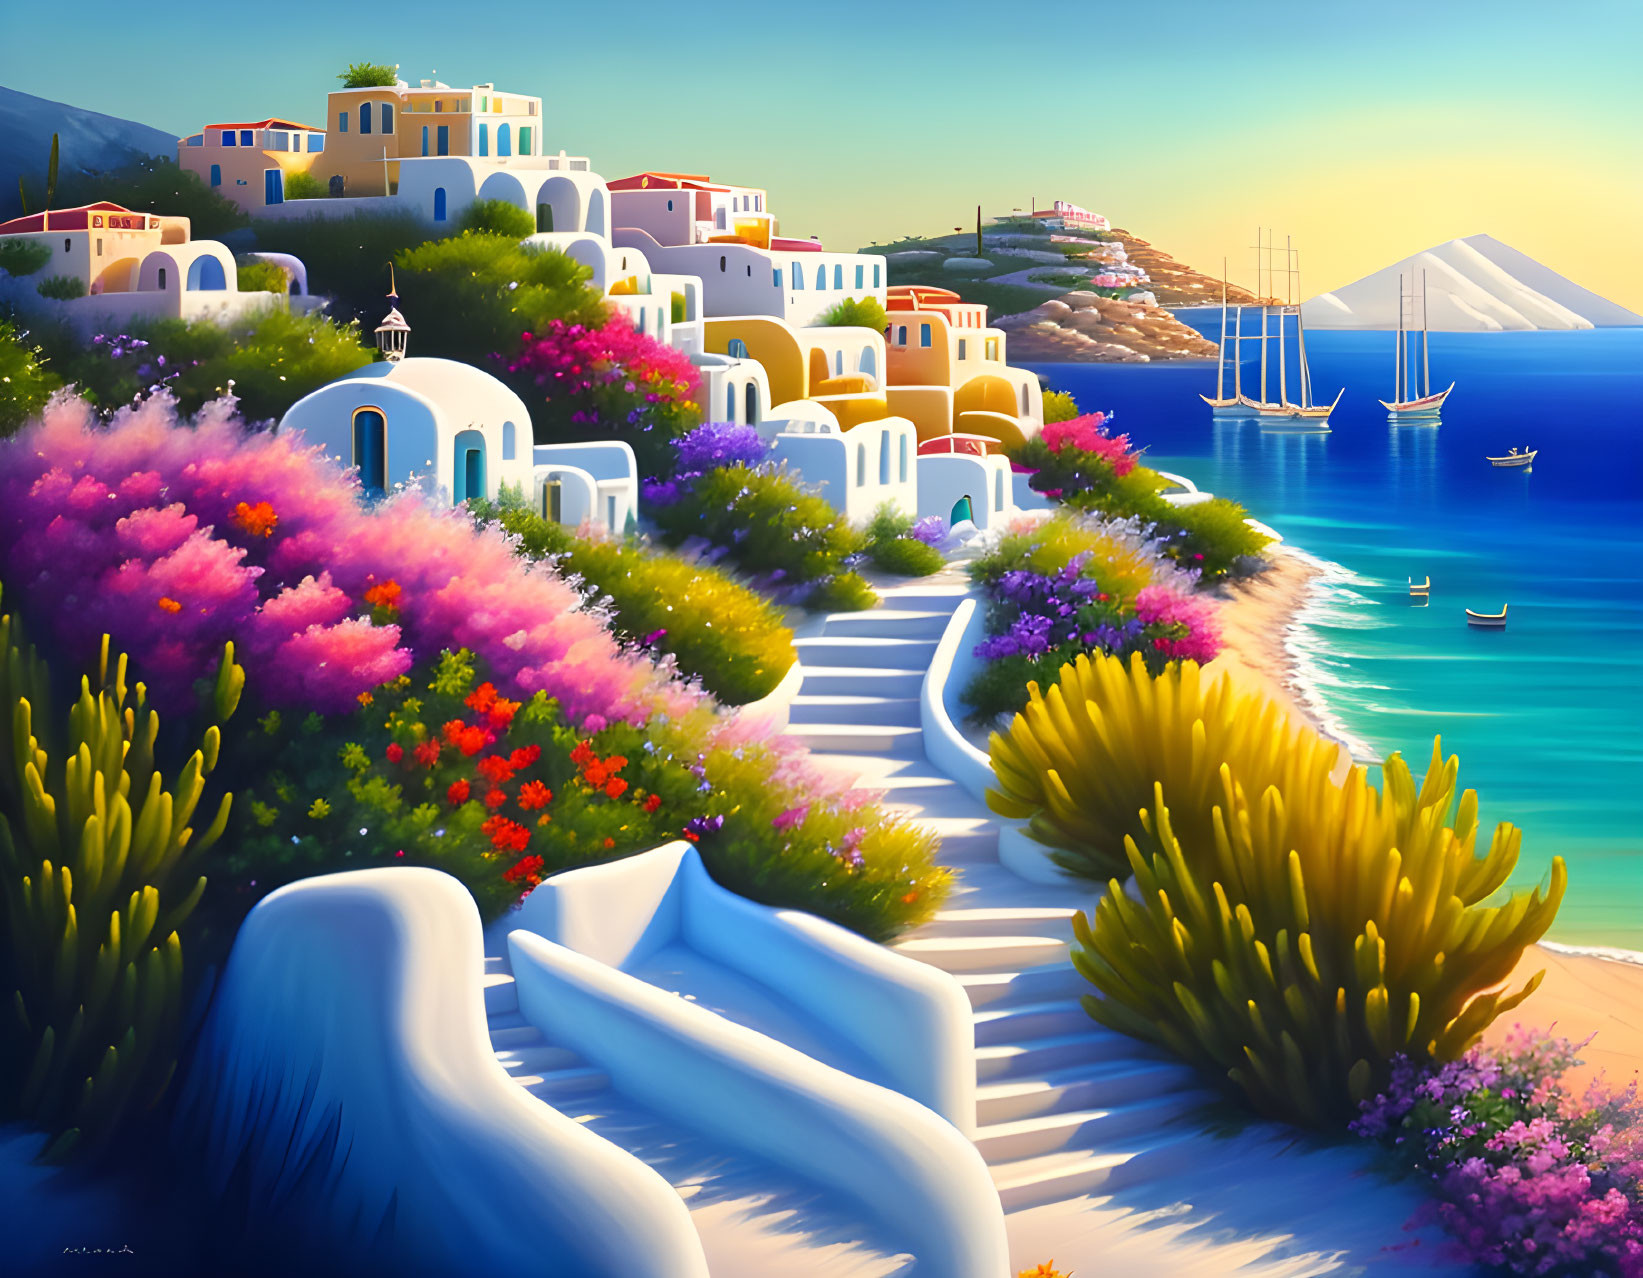 Scenic coastal village painting with white houses, flowers, and boats